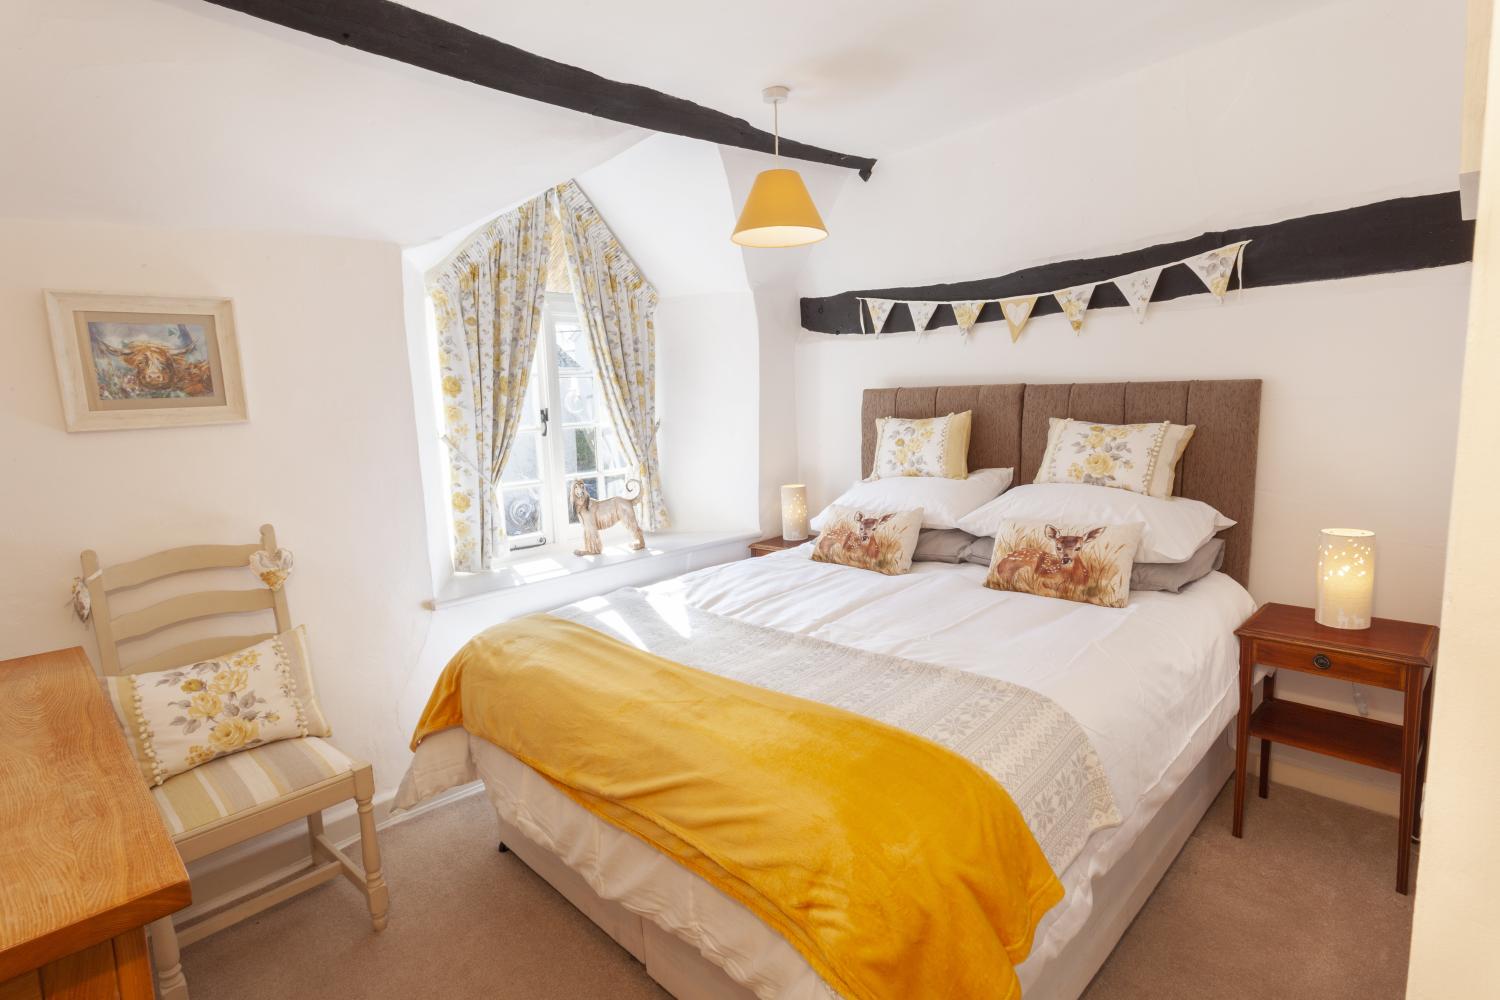 King-Sized Double bed at Cosy Nook